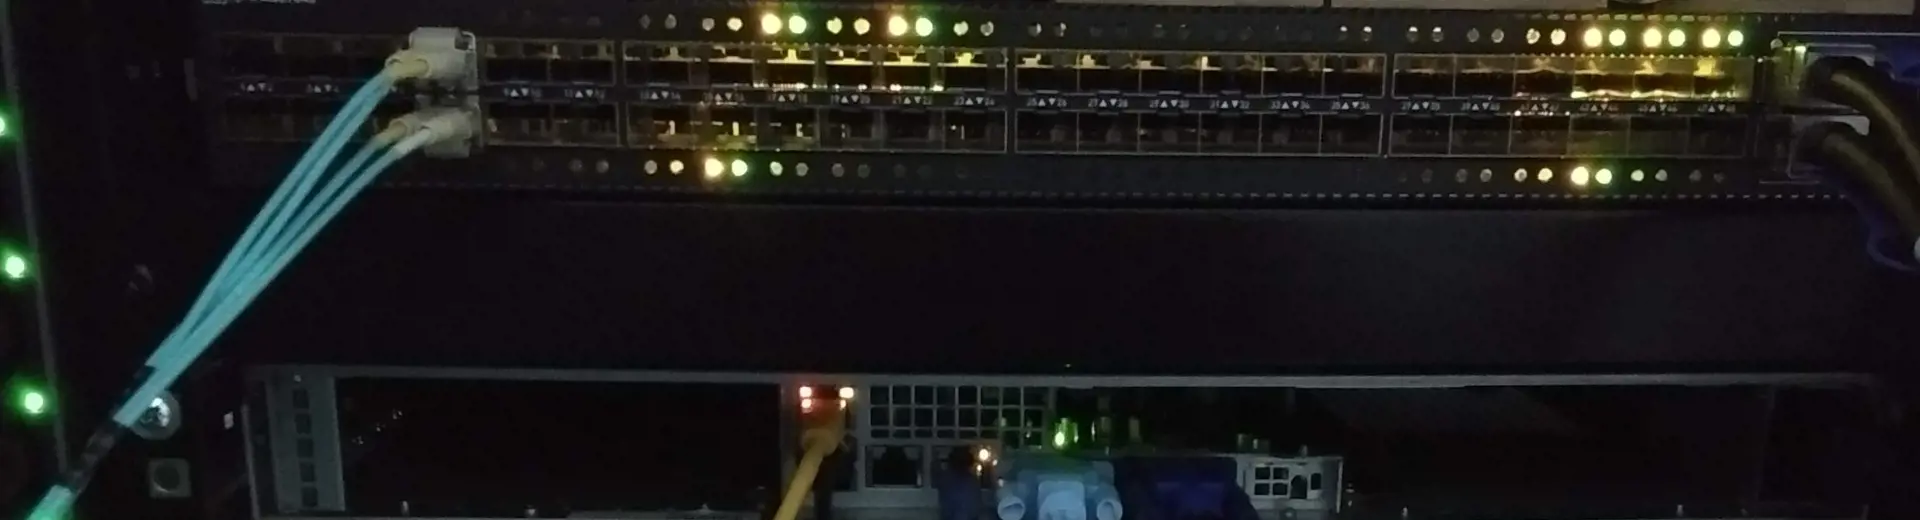 A switch board with lights and cables